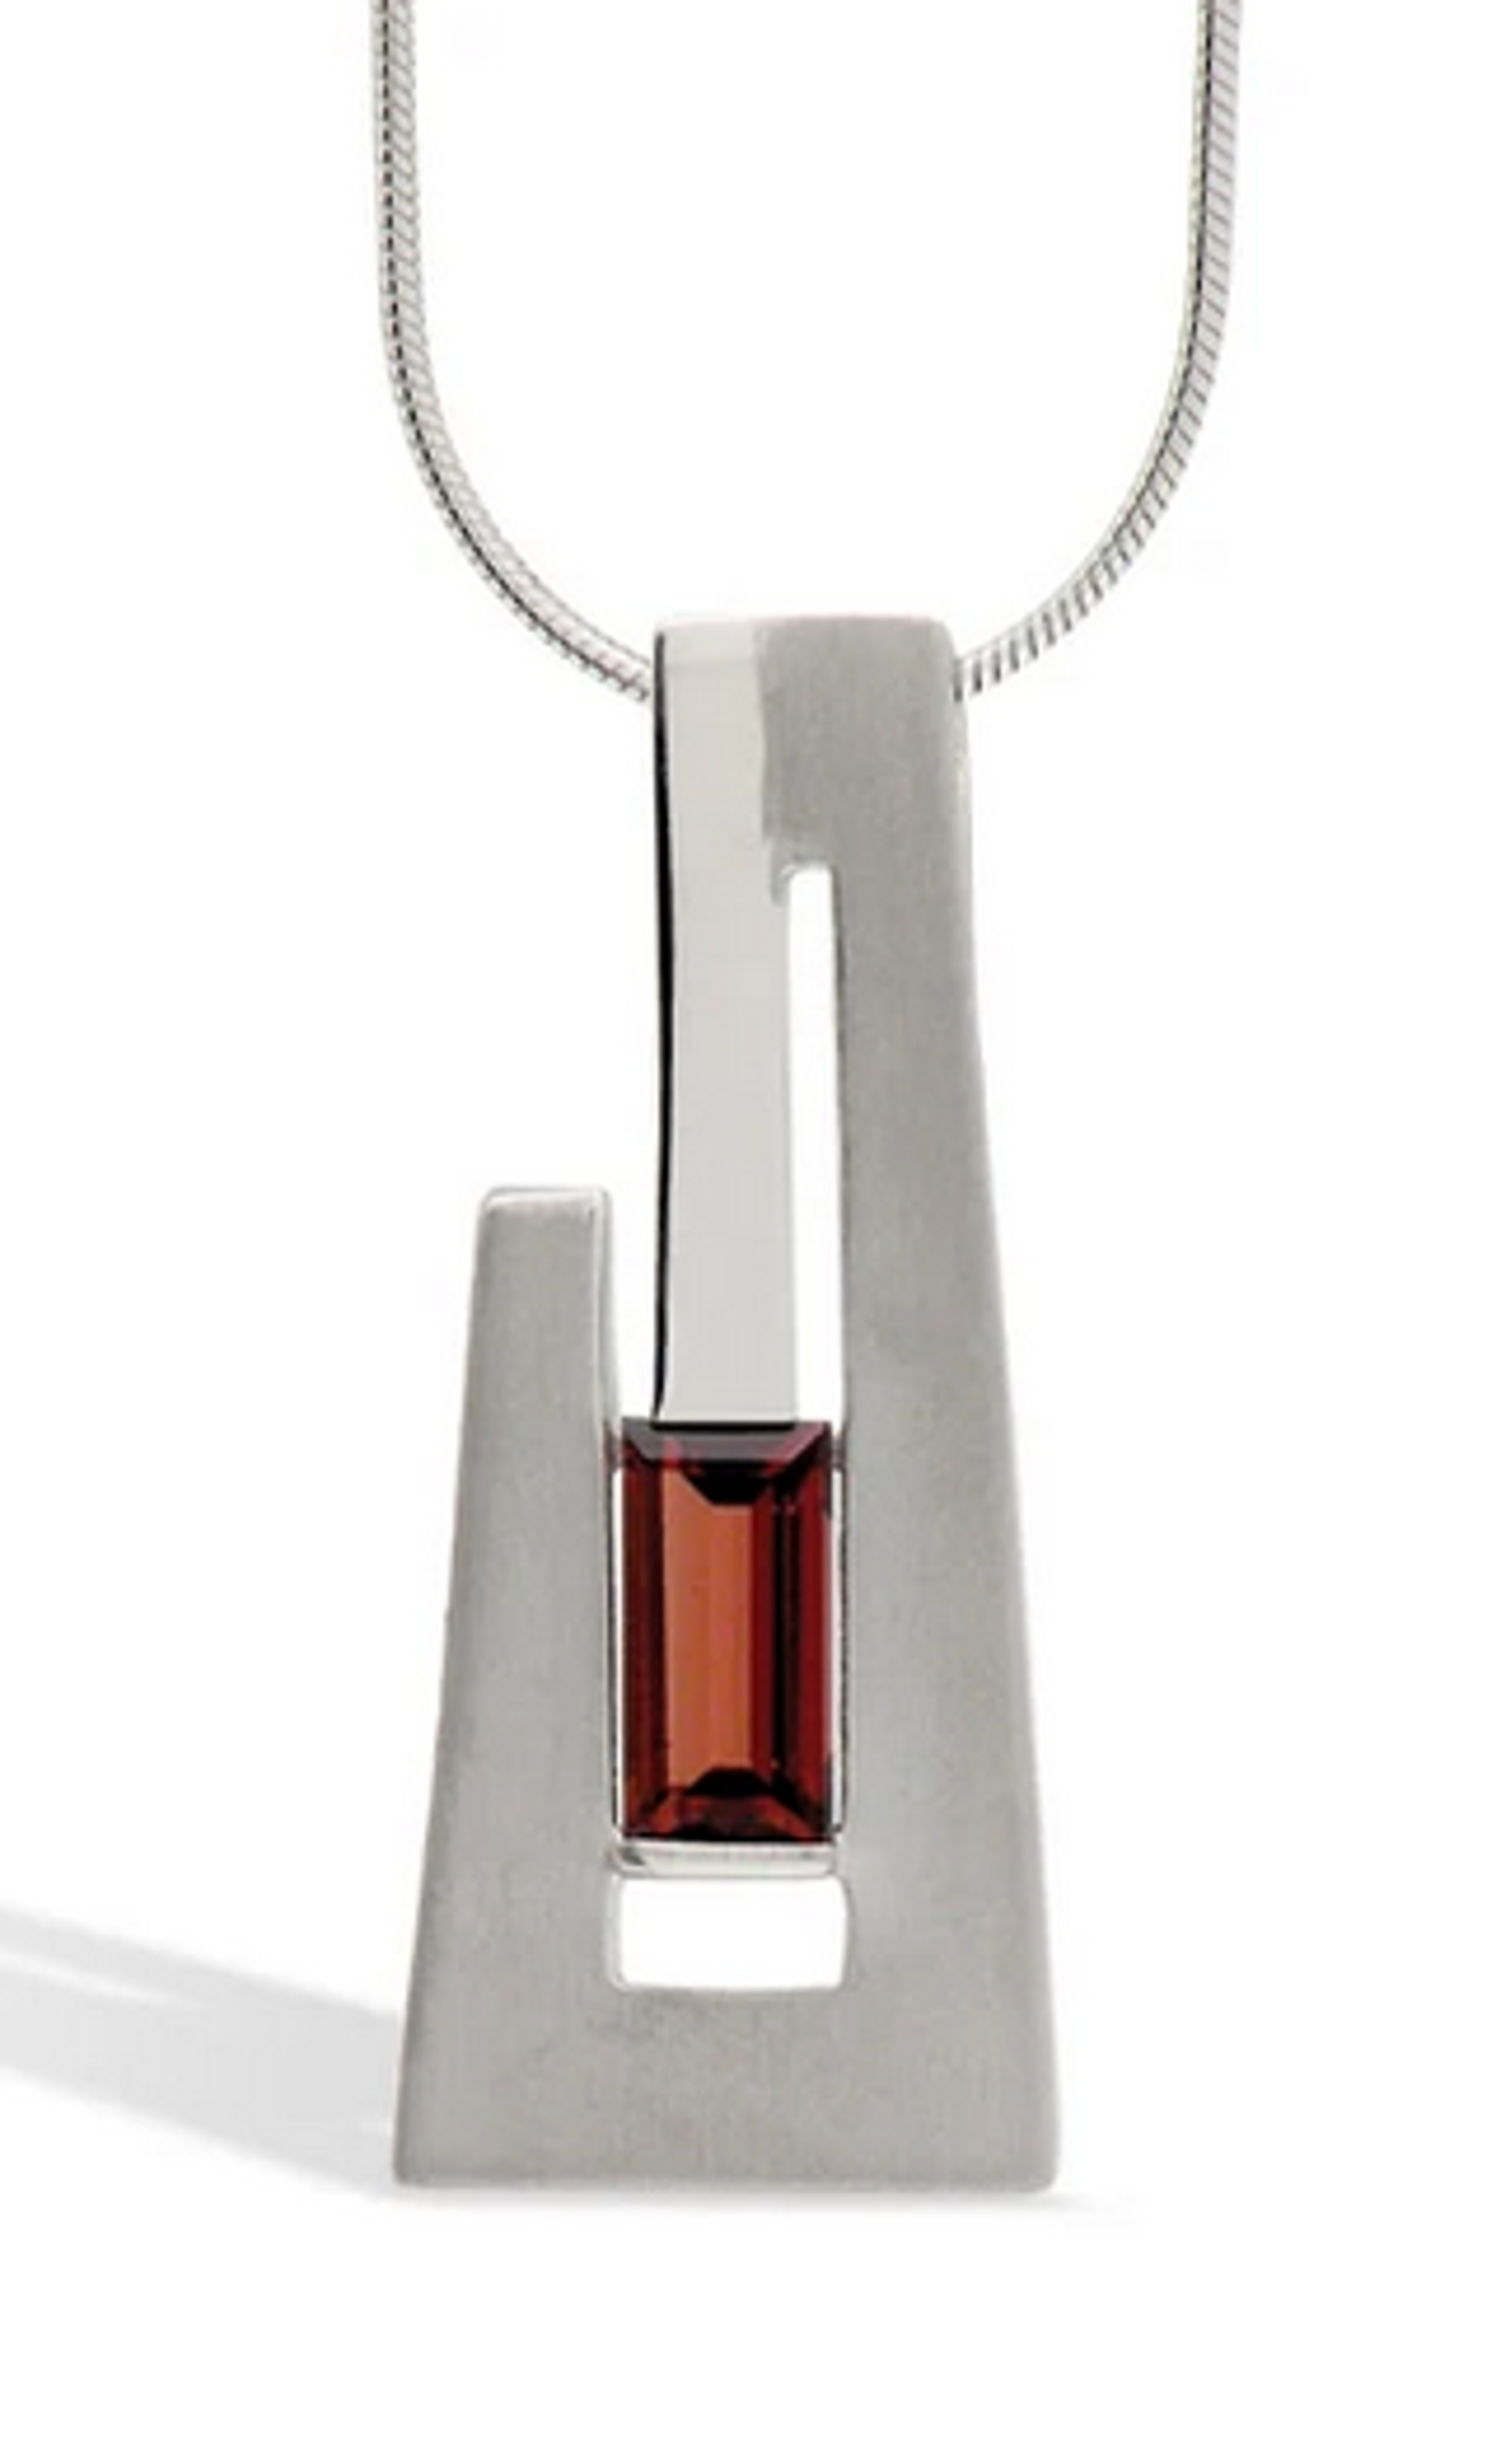 Pendant - Emerald Cut Garnet With Brushed Sterling Silver  P7313G by Joryel Vera